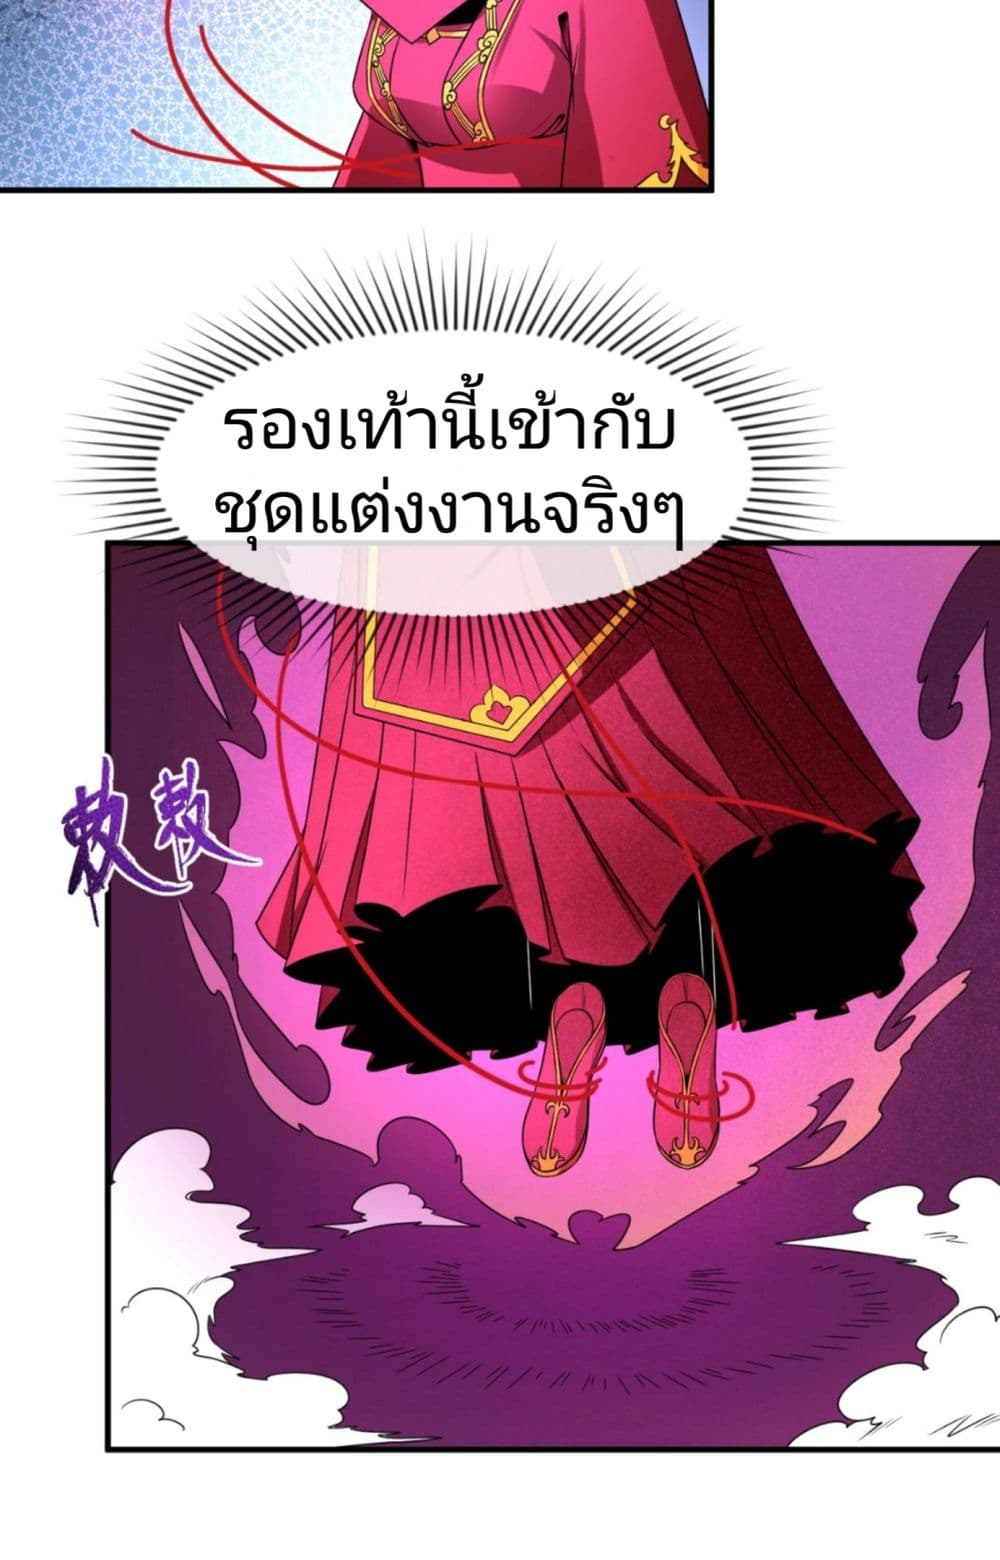 The Age of Ghost Spirits à¸à¸­à¸à¸à¸µà¹ 13 (36)